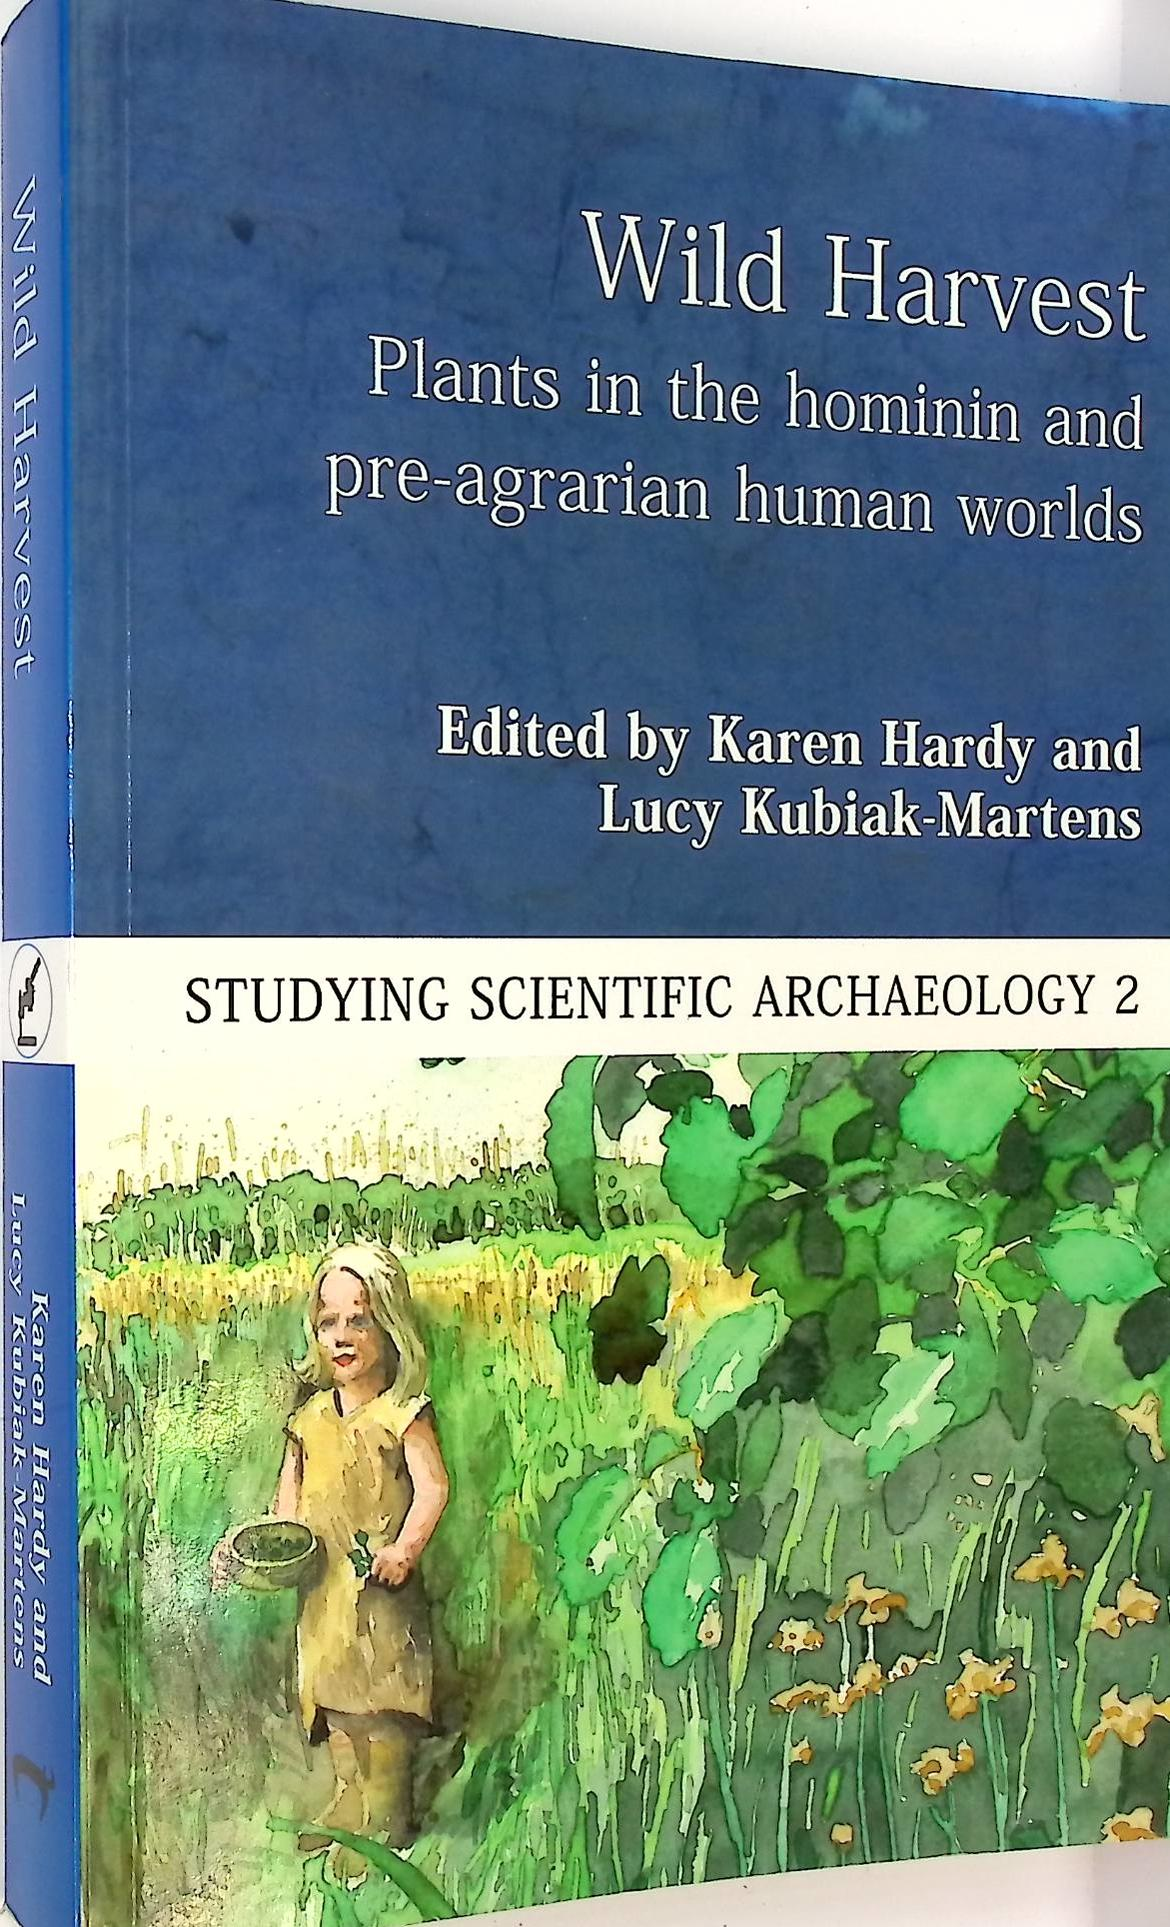 Wild Harvest. Plants in the Hominin and Pre-agrarian Human Worlds